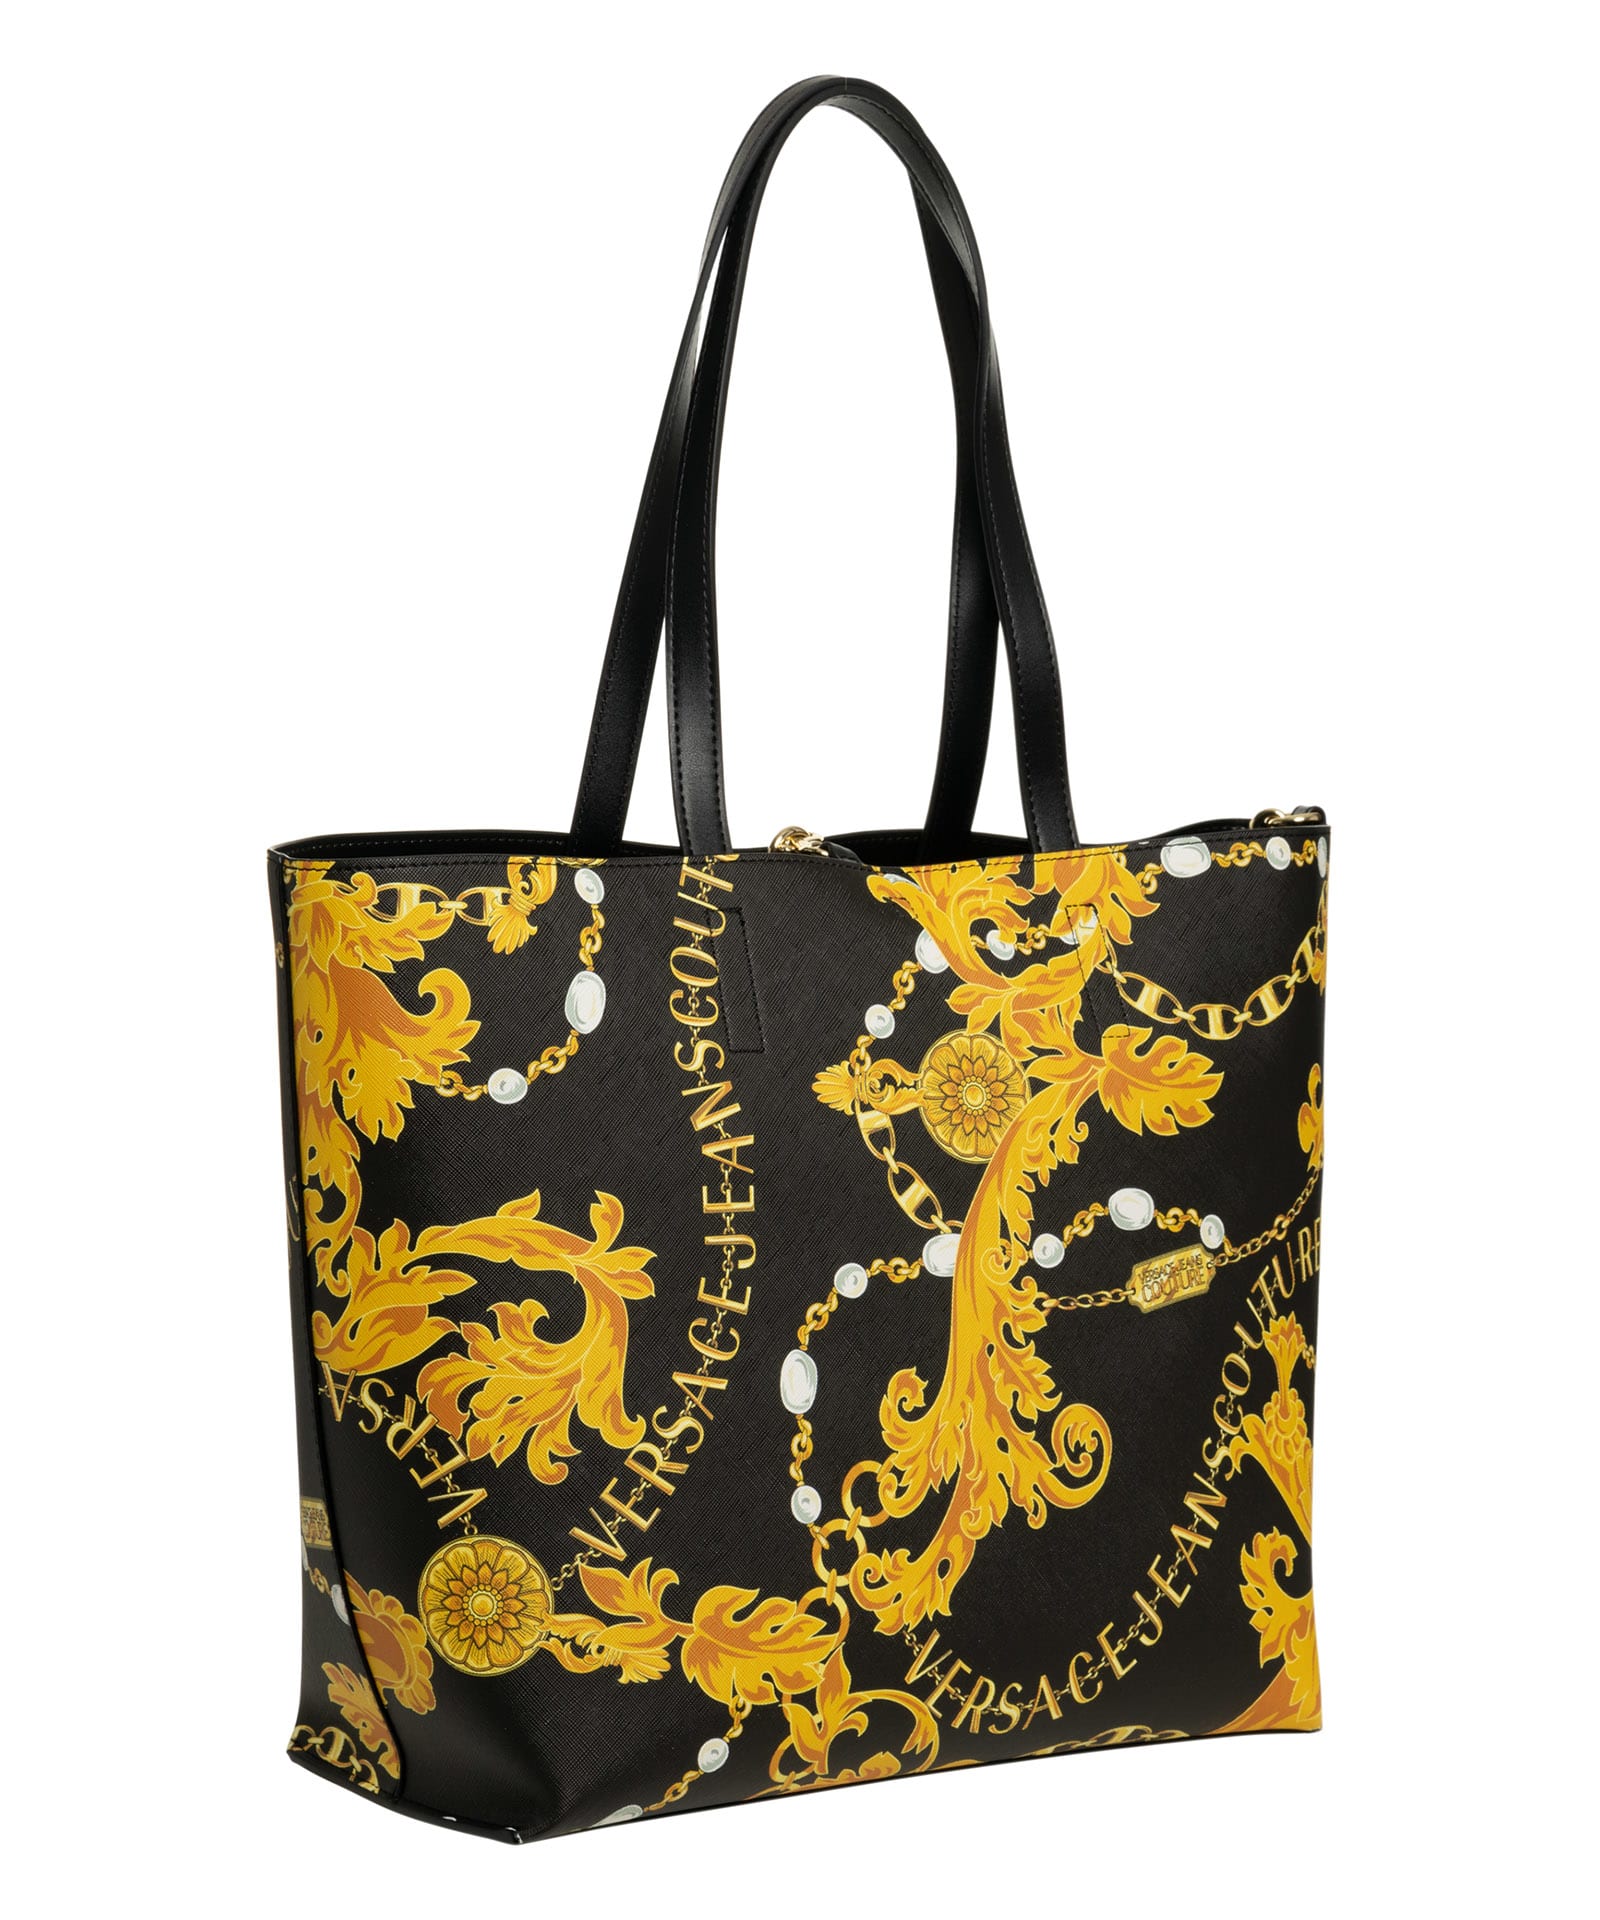 Versace Jeans Couture Chain Couture Chain Couture Tote Bag In Black - Gold